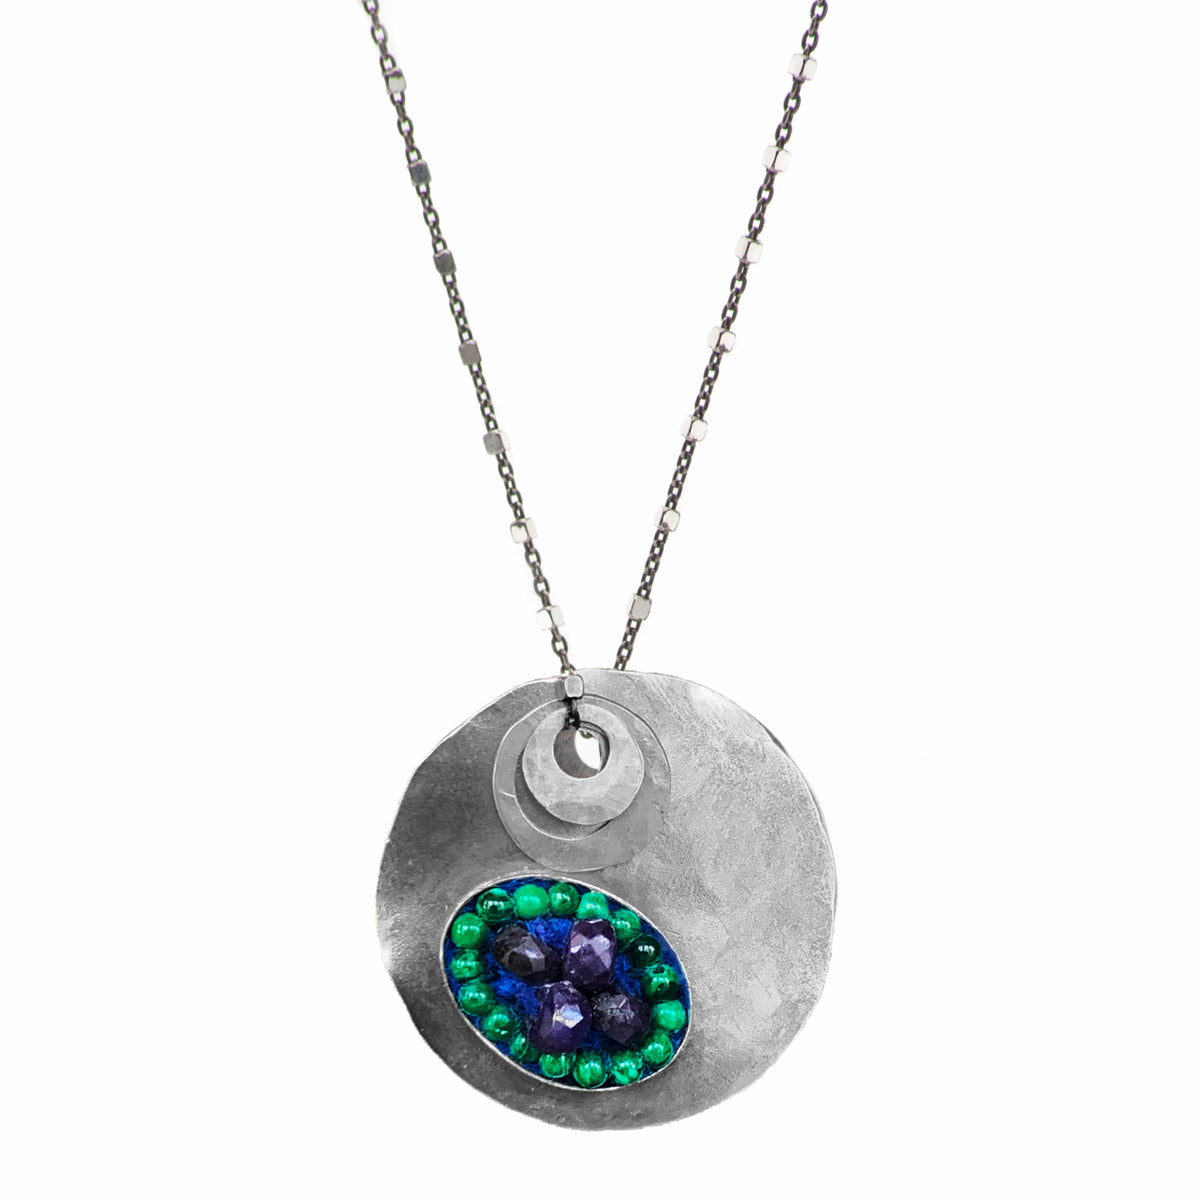 Hand Hammered Silver, sapphire, and malachite necklace